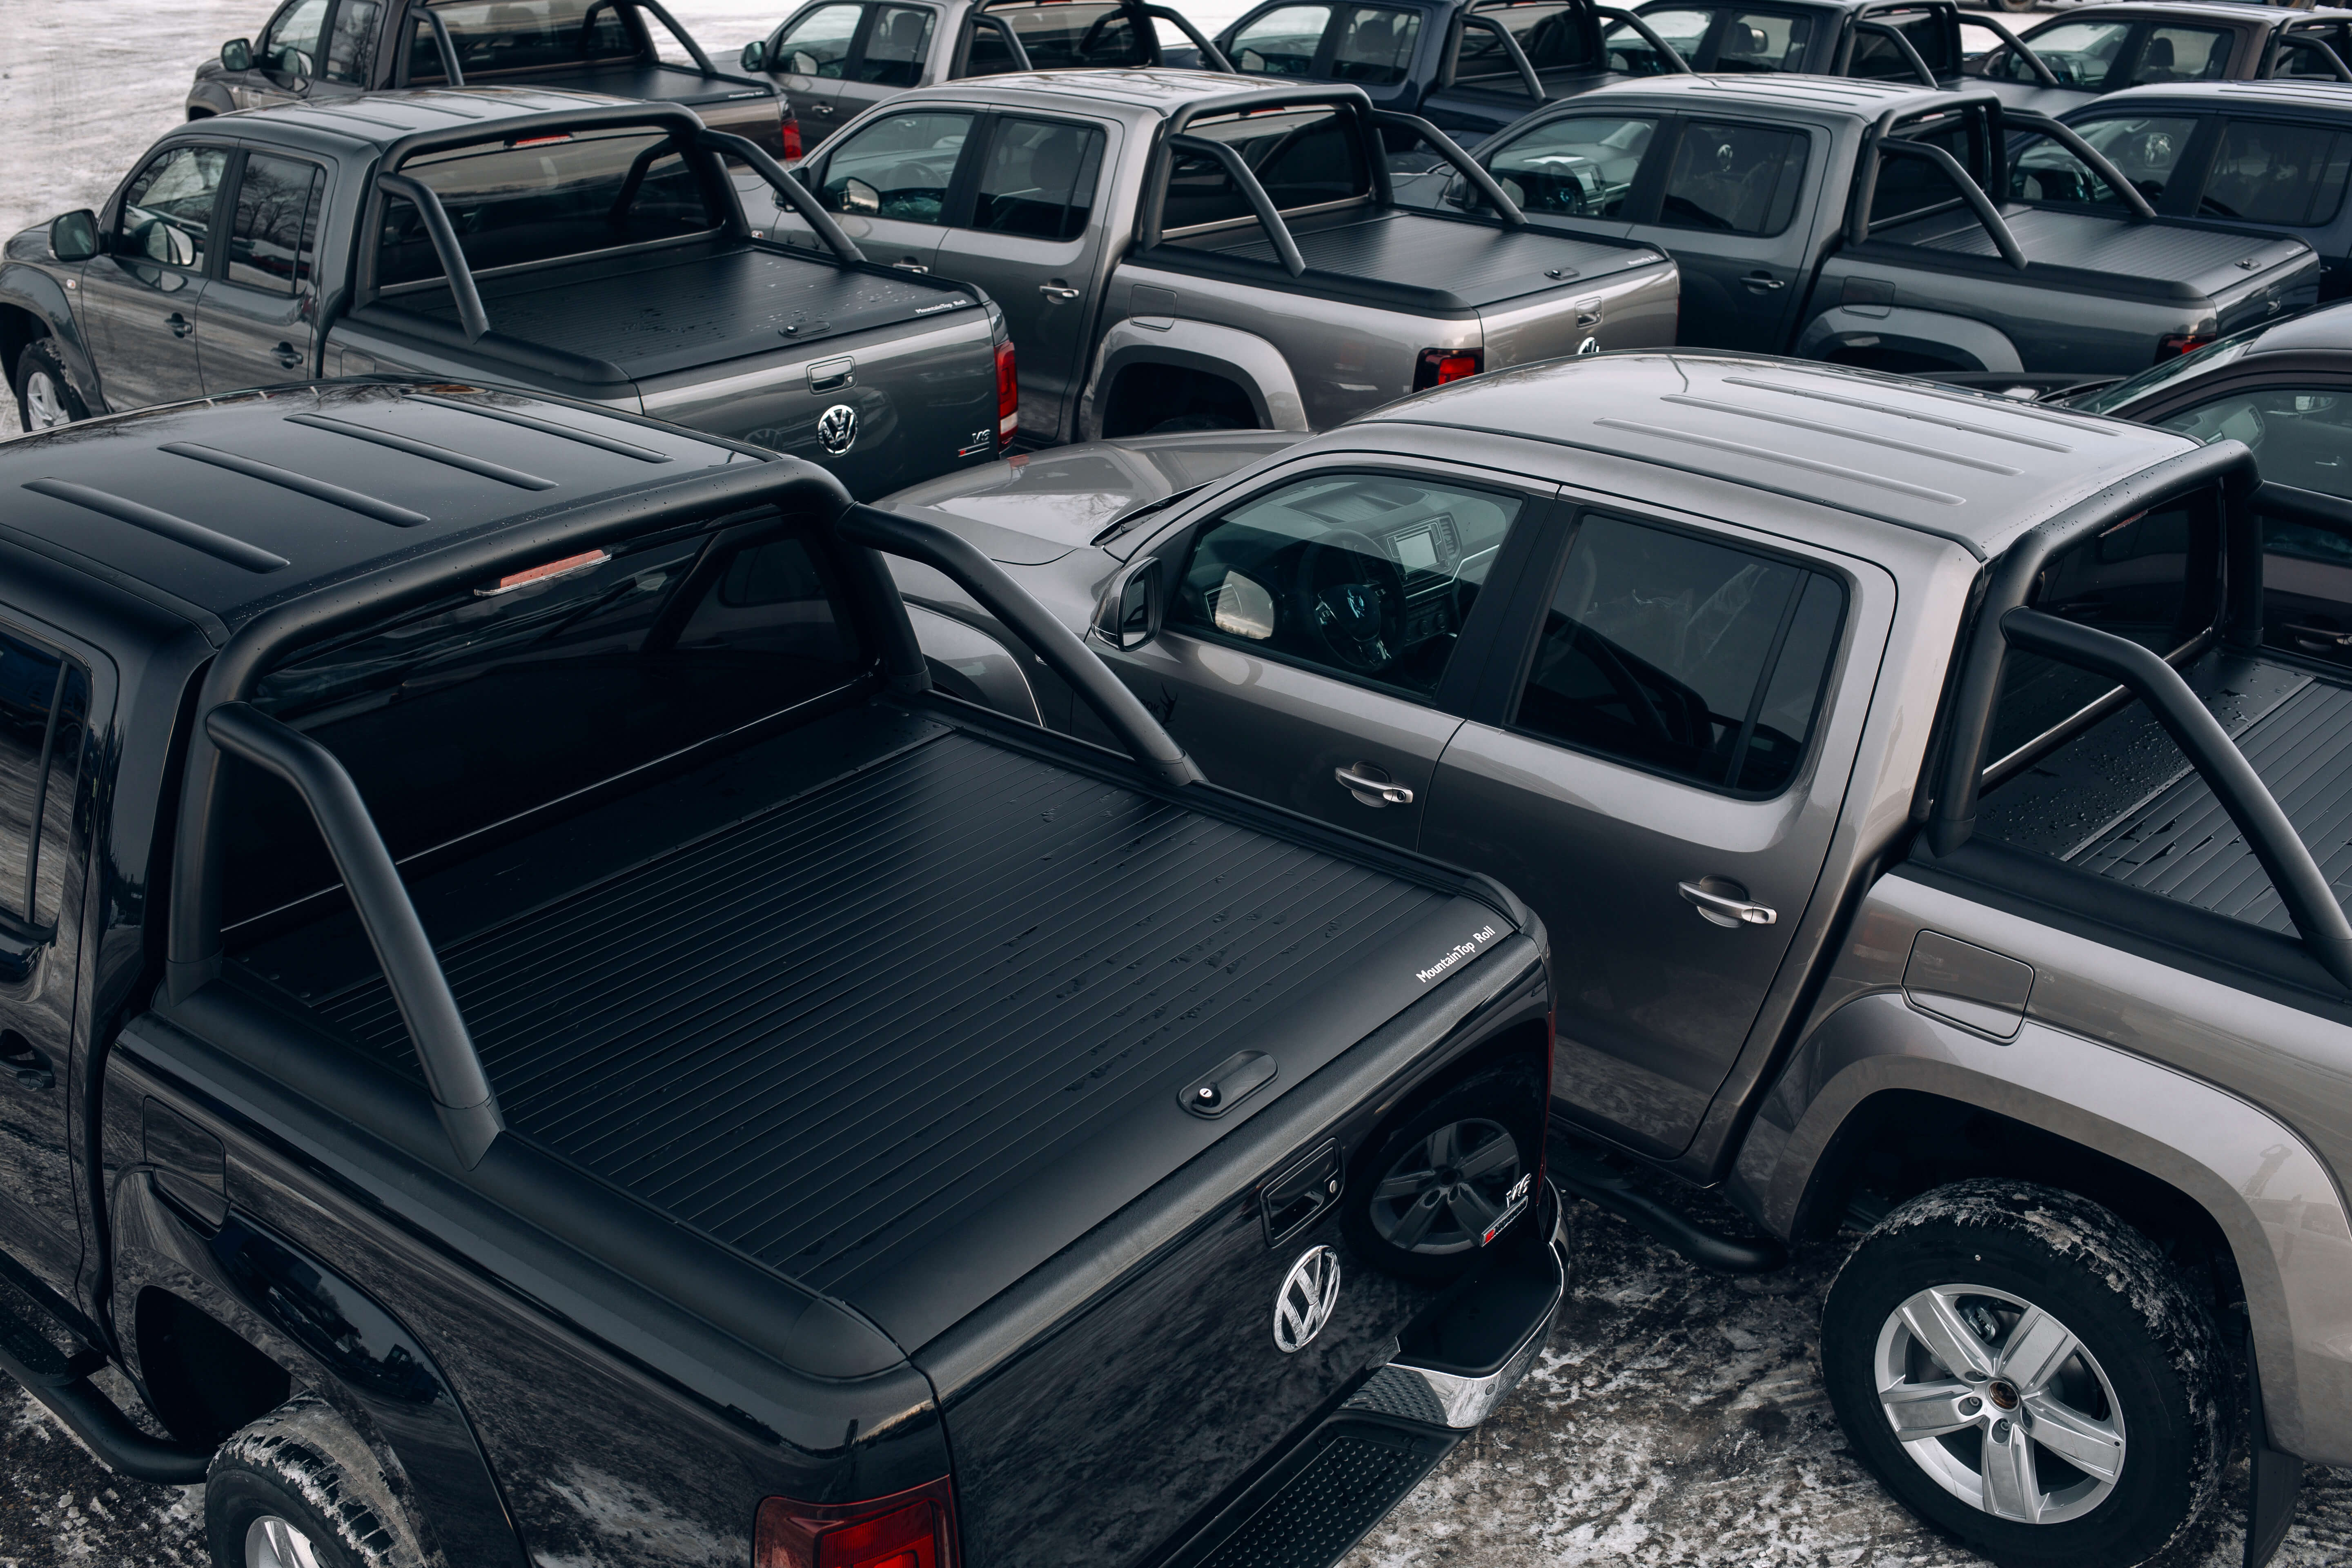 Pickup Truck Tonneau Cover Specialists (UK)